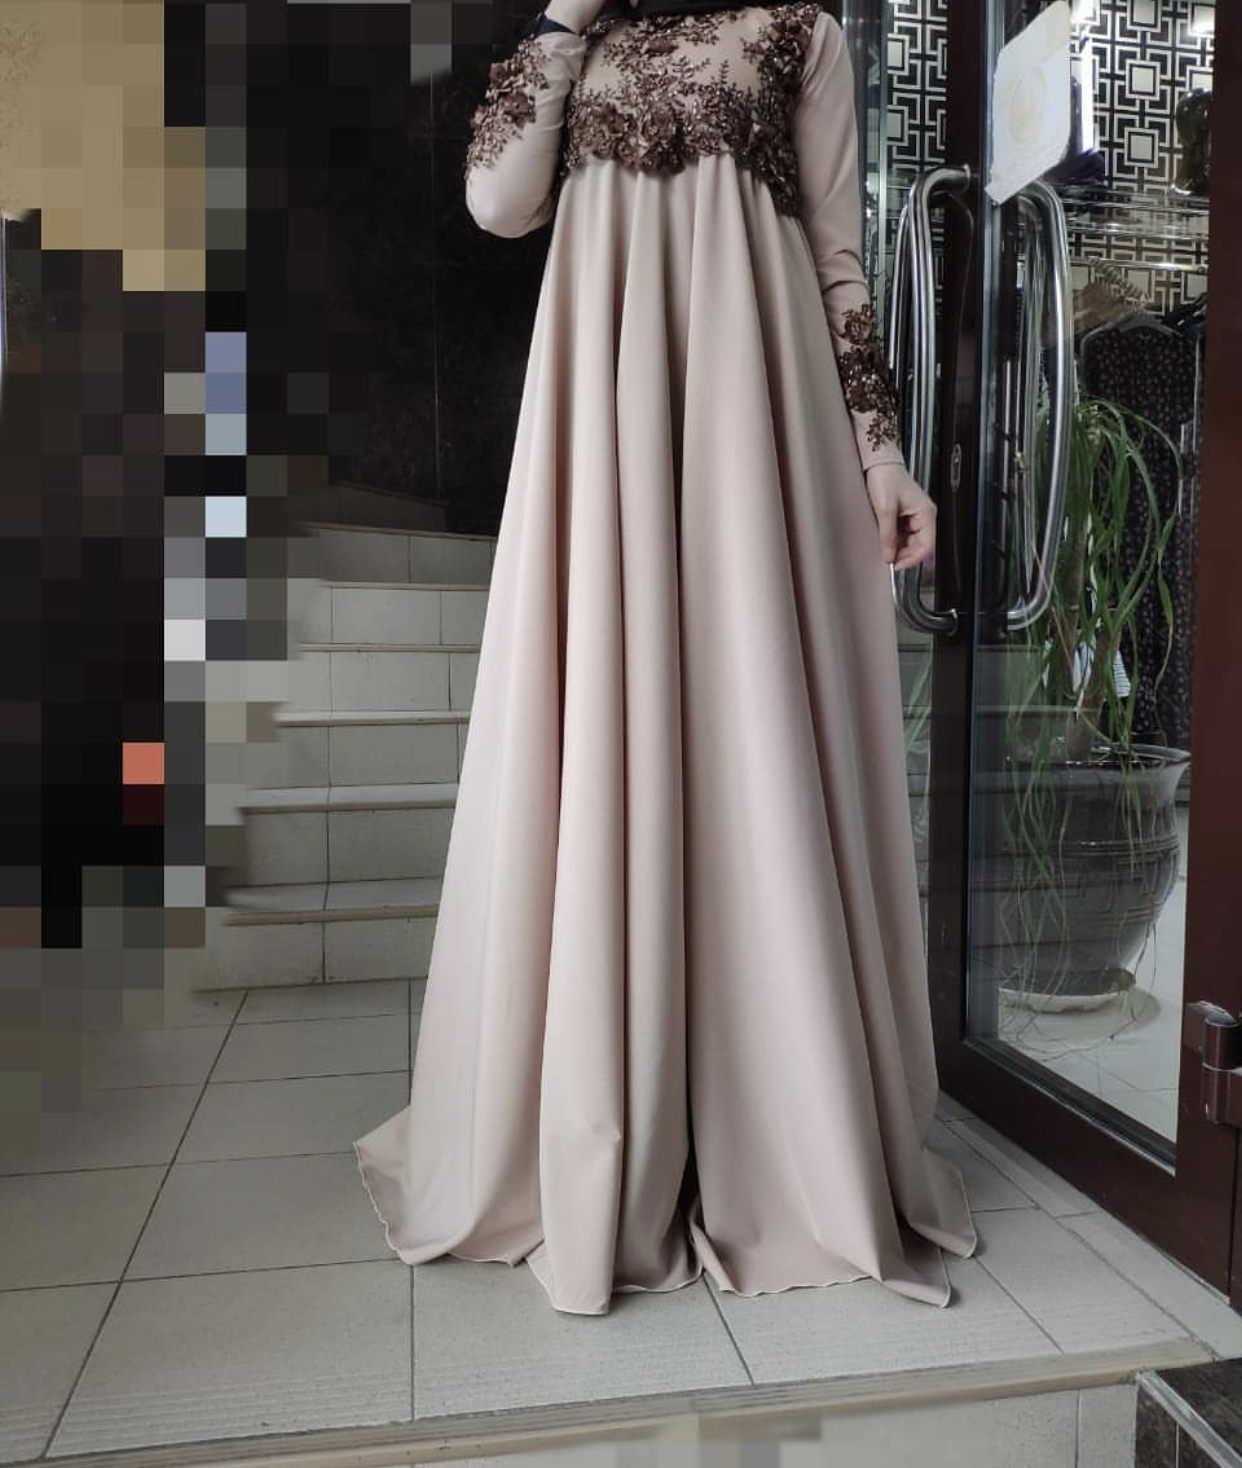 Muslim dresses WANTED. Wide cut. Colors: neutral. Sizes: all.